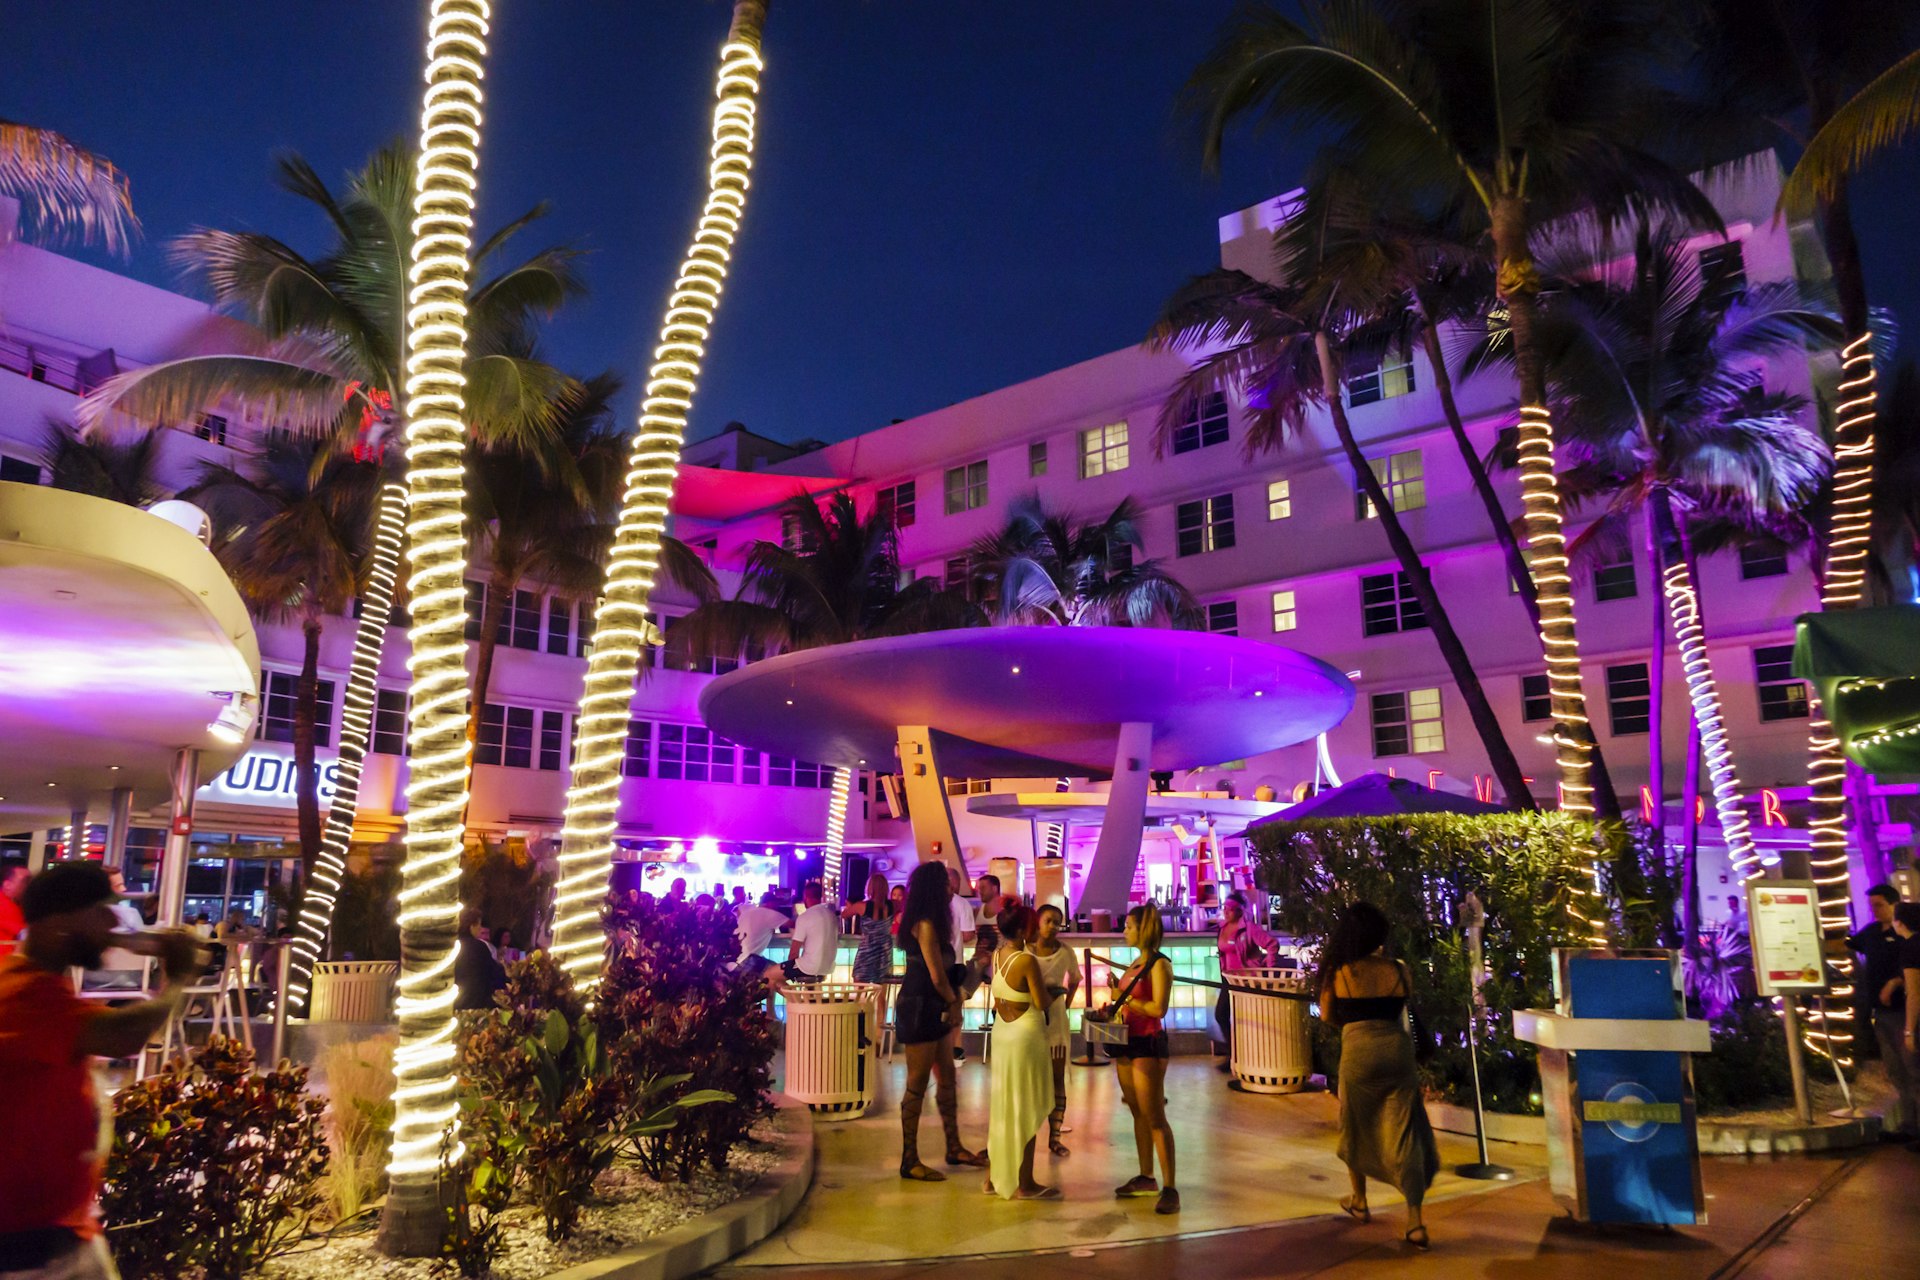 Young women chat in front of a Miami outdoor nightclub dominated by a palm tree wrapped in lights